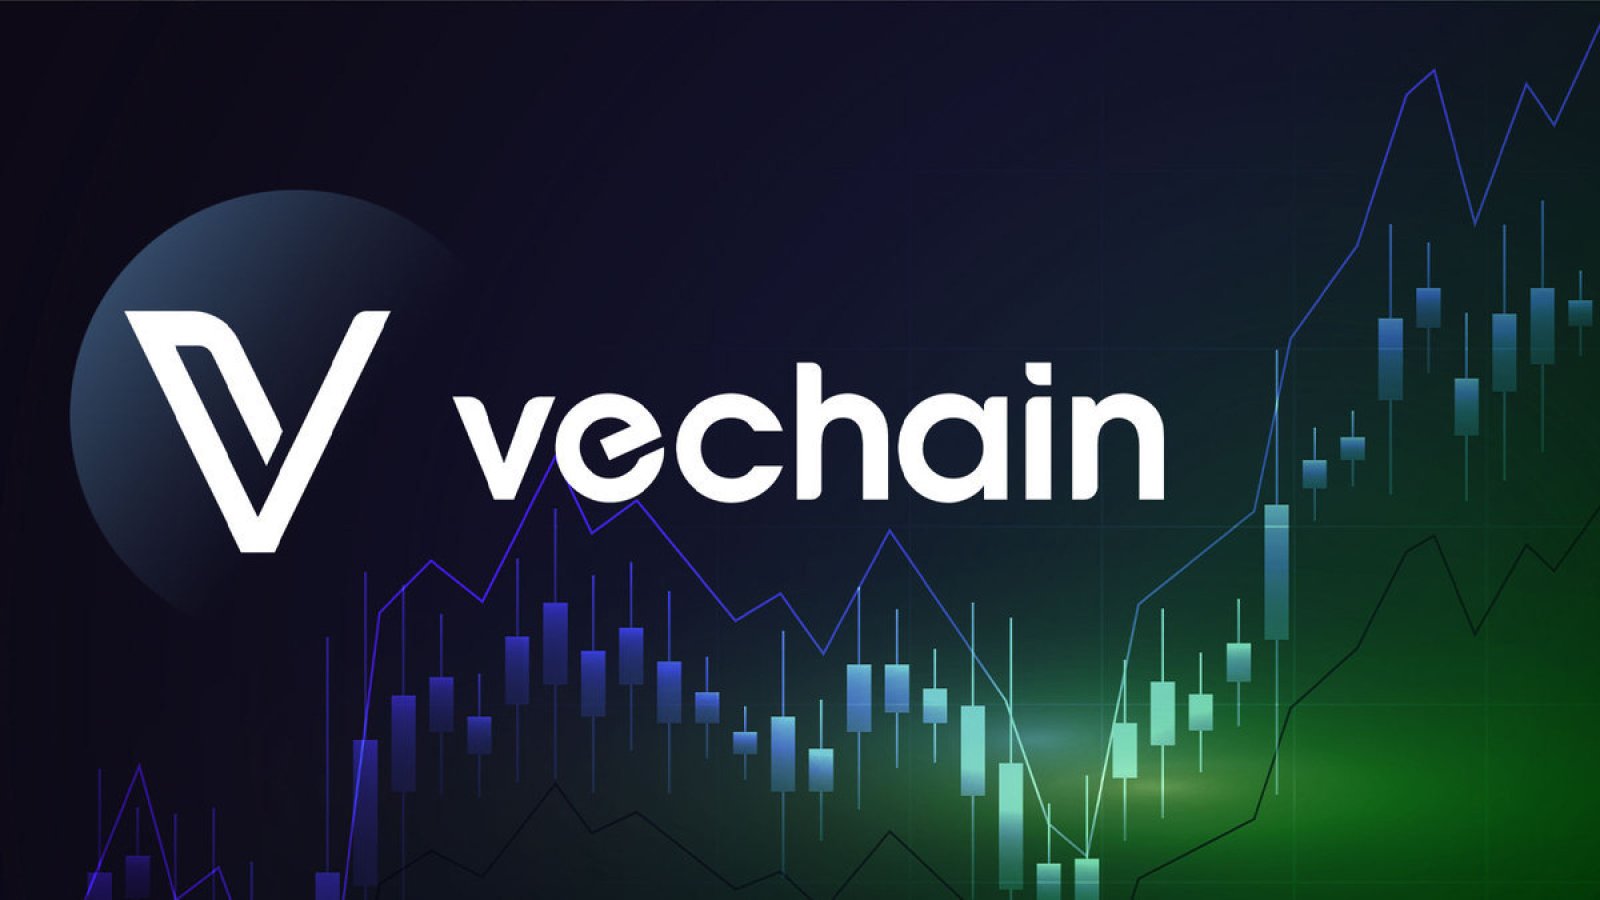 Enterprise Blockchain Altcoin VeChain (VET) Jumps After New Coinbase Listing - The Daily Hodl